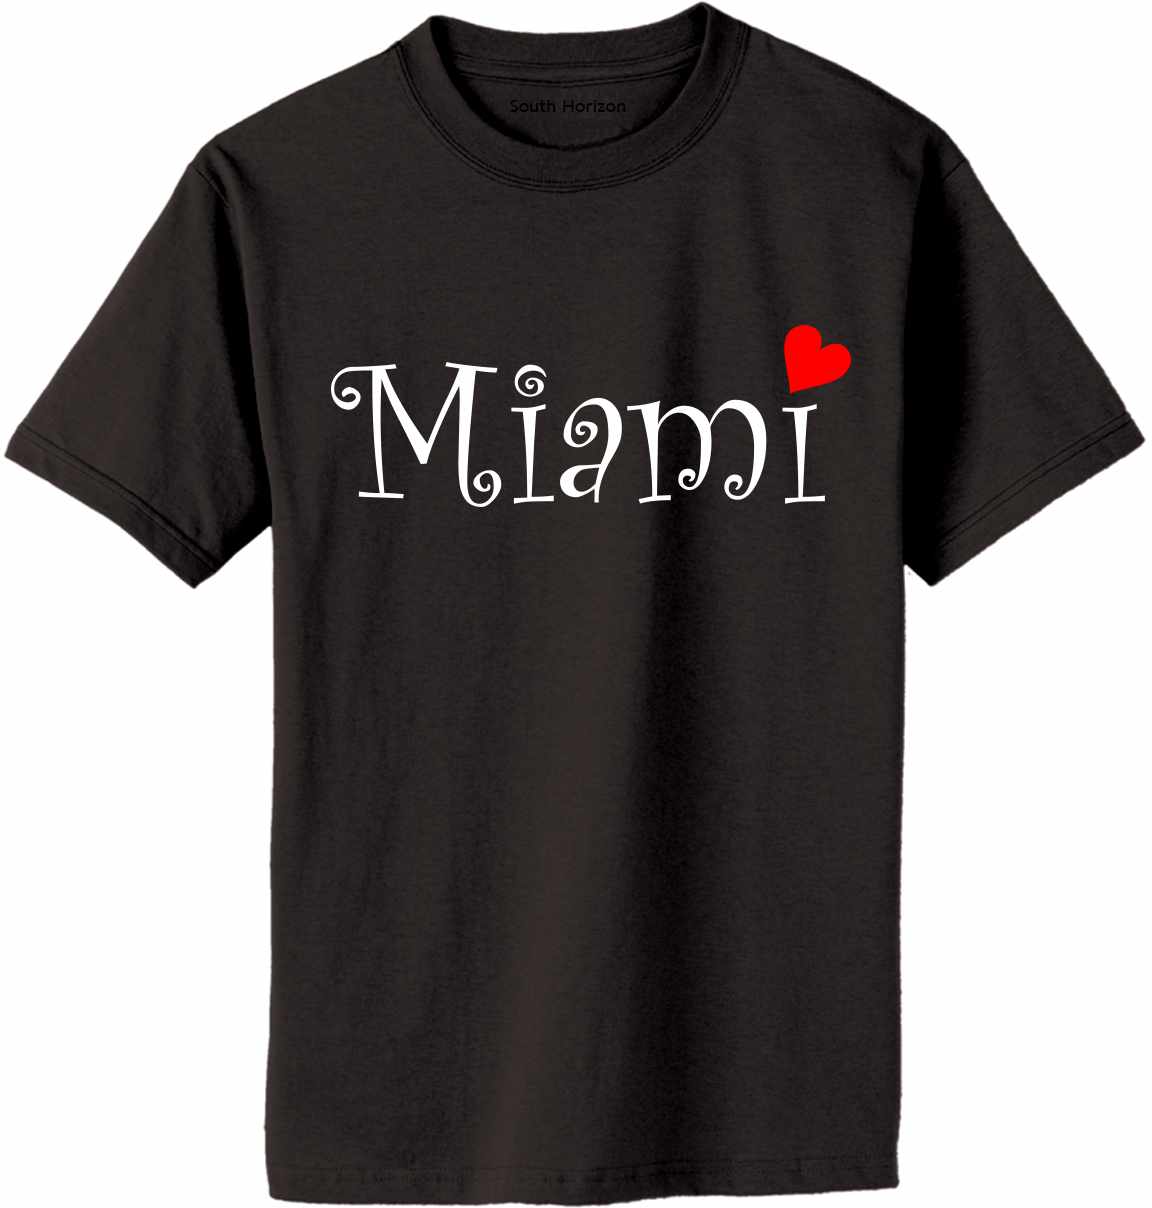 Miami City on Adult T-Shirt